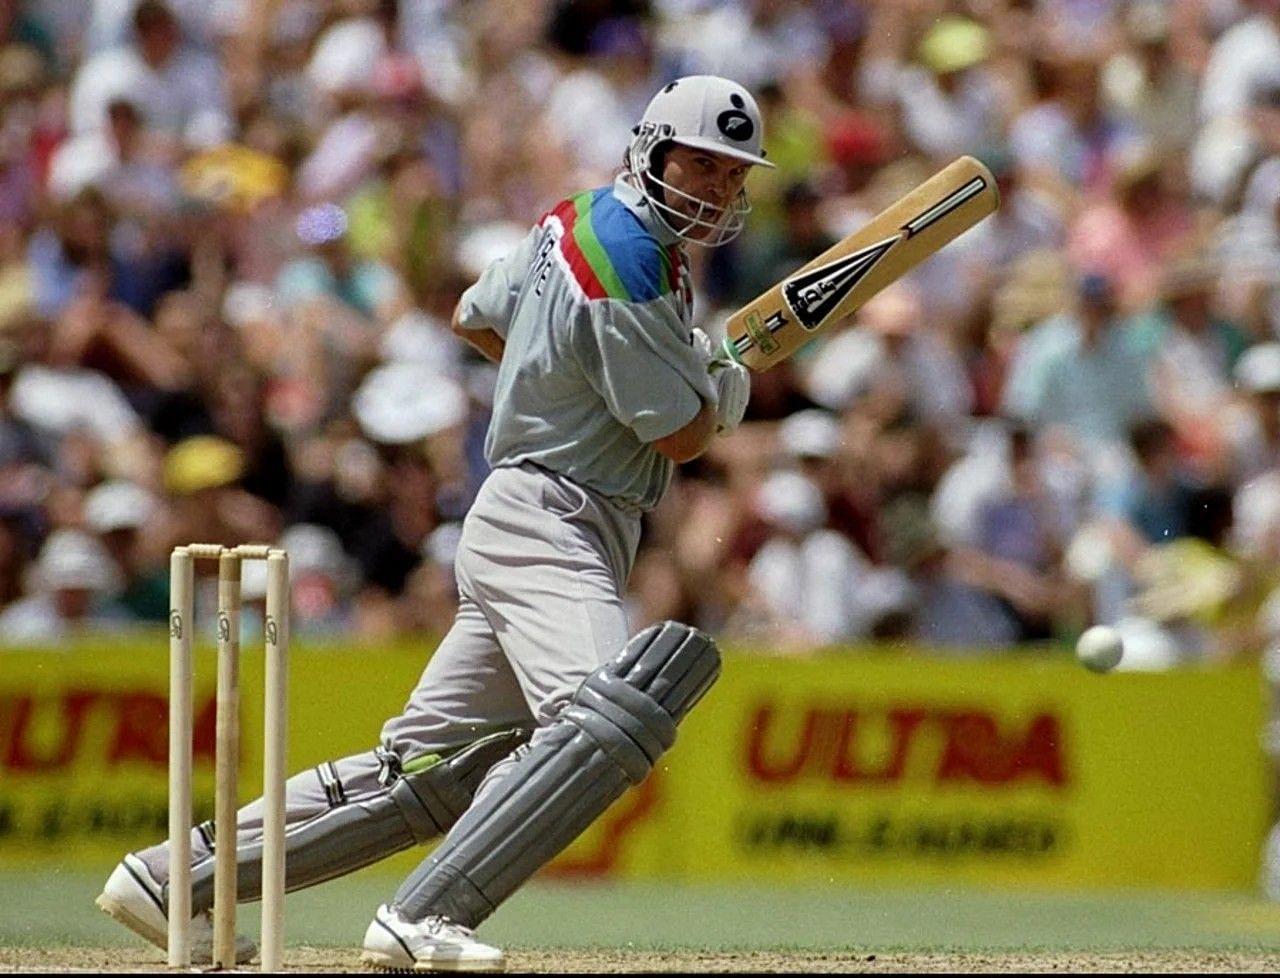 Martin Crowe scored a splendid century for New Zealand vs AUS [Getty Images]